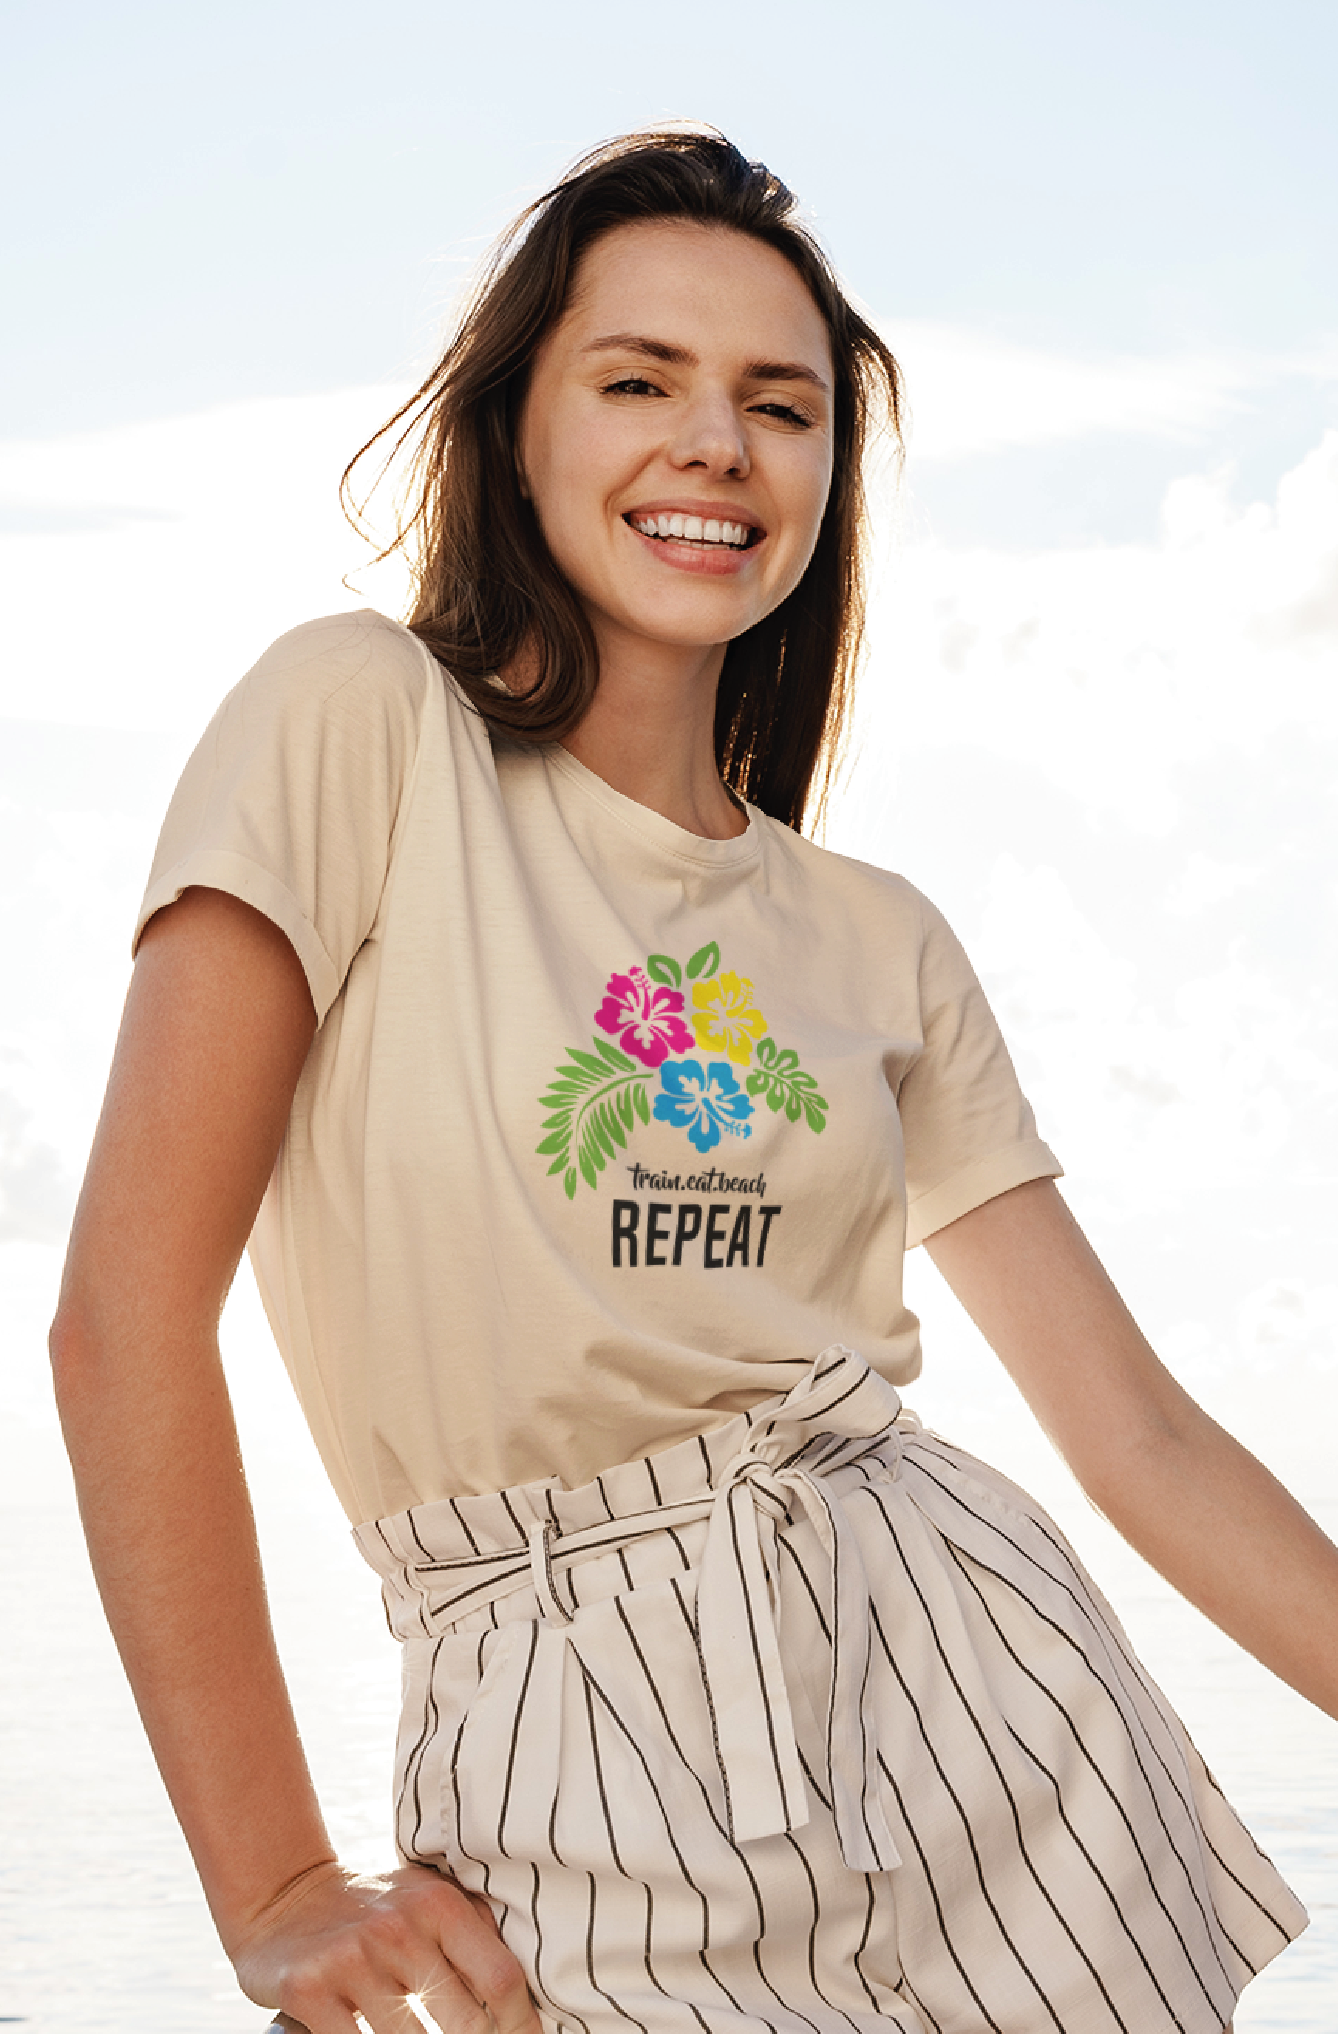 Women out on a boat smiling wearing a white tshirt with neon hibiscus flowers and typographic elements on